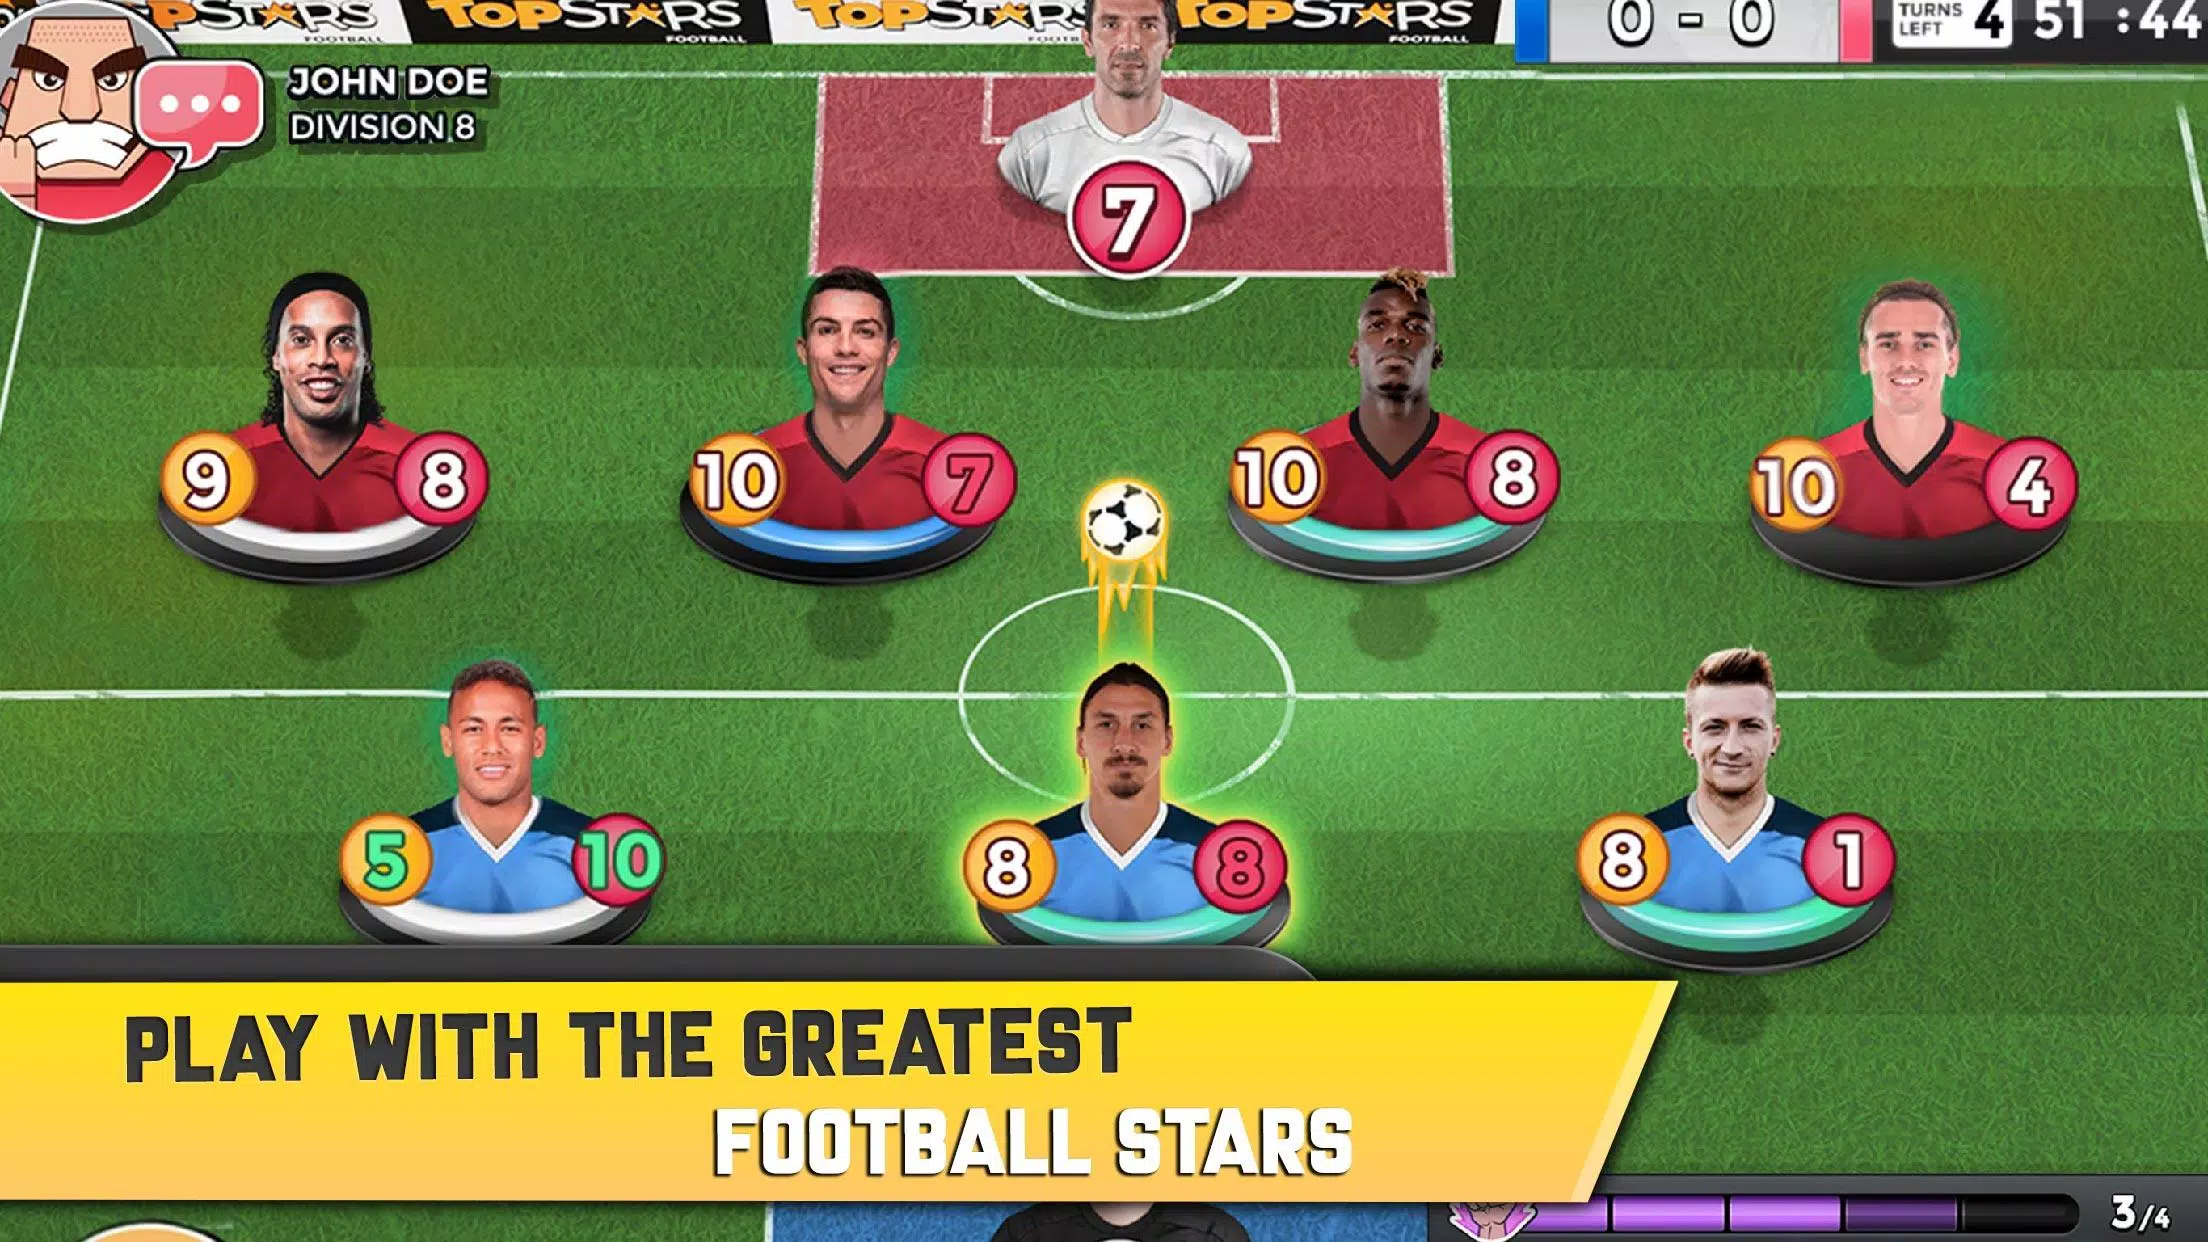 Top Stars: Football Match! for Android - APK Download